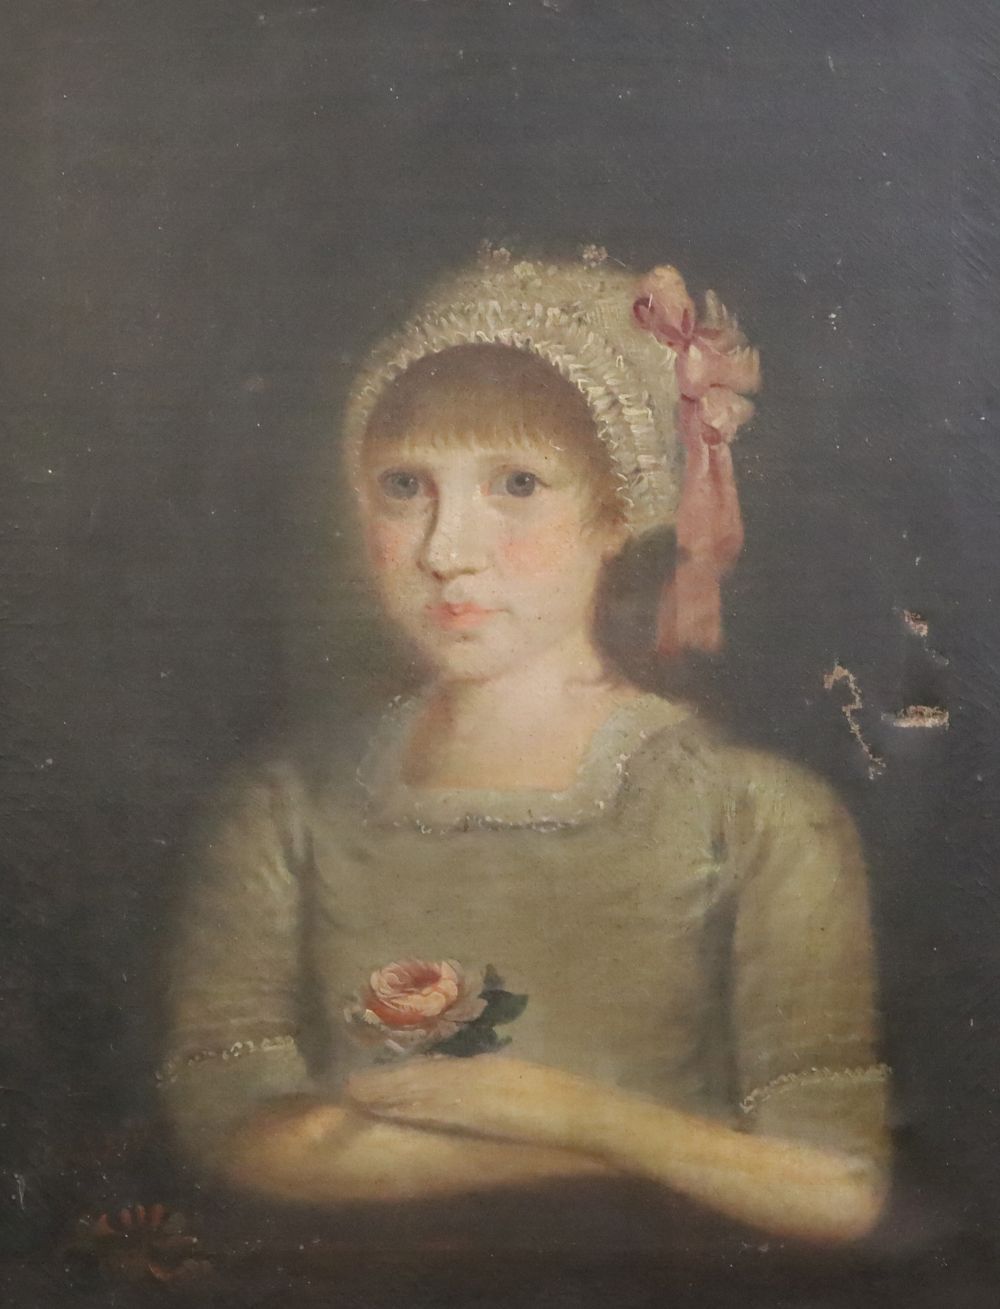 Early 19th century Continental School, possibly American Portrait of a girl holding a rose 24 x 19in.